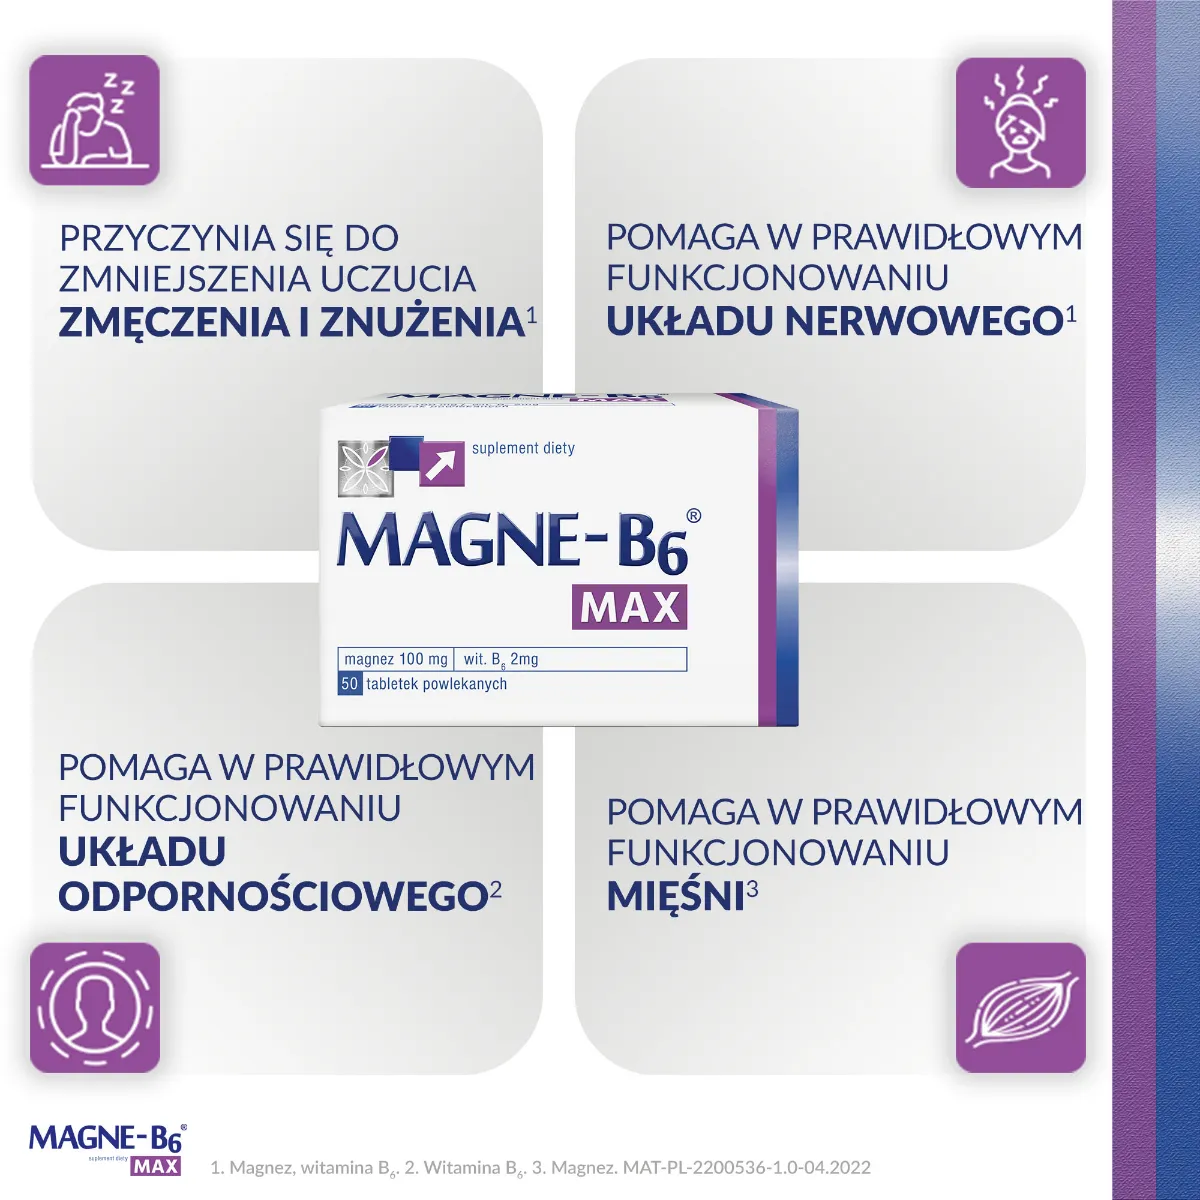 Magne-B6 MAX, magnez 100 mg, suplement diety, 50 tabletek powlekanych 